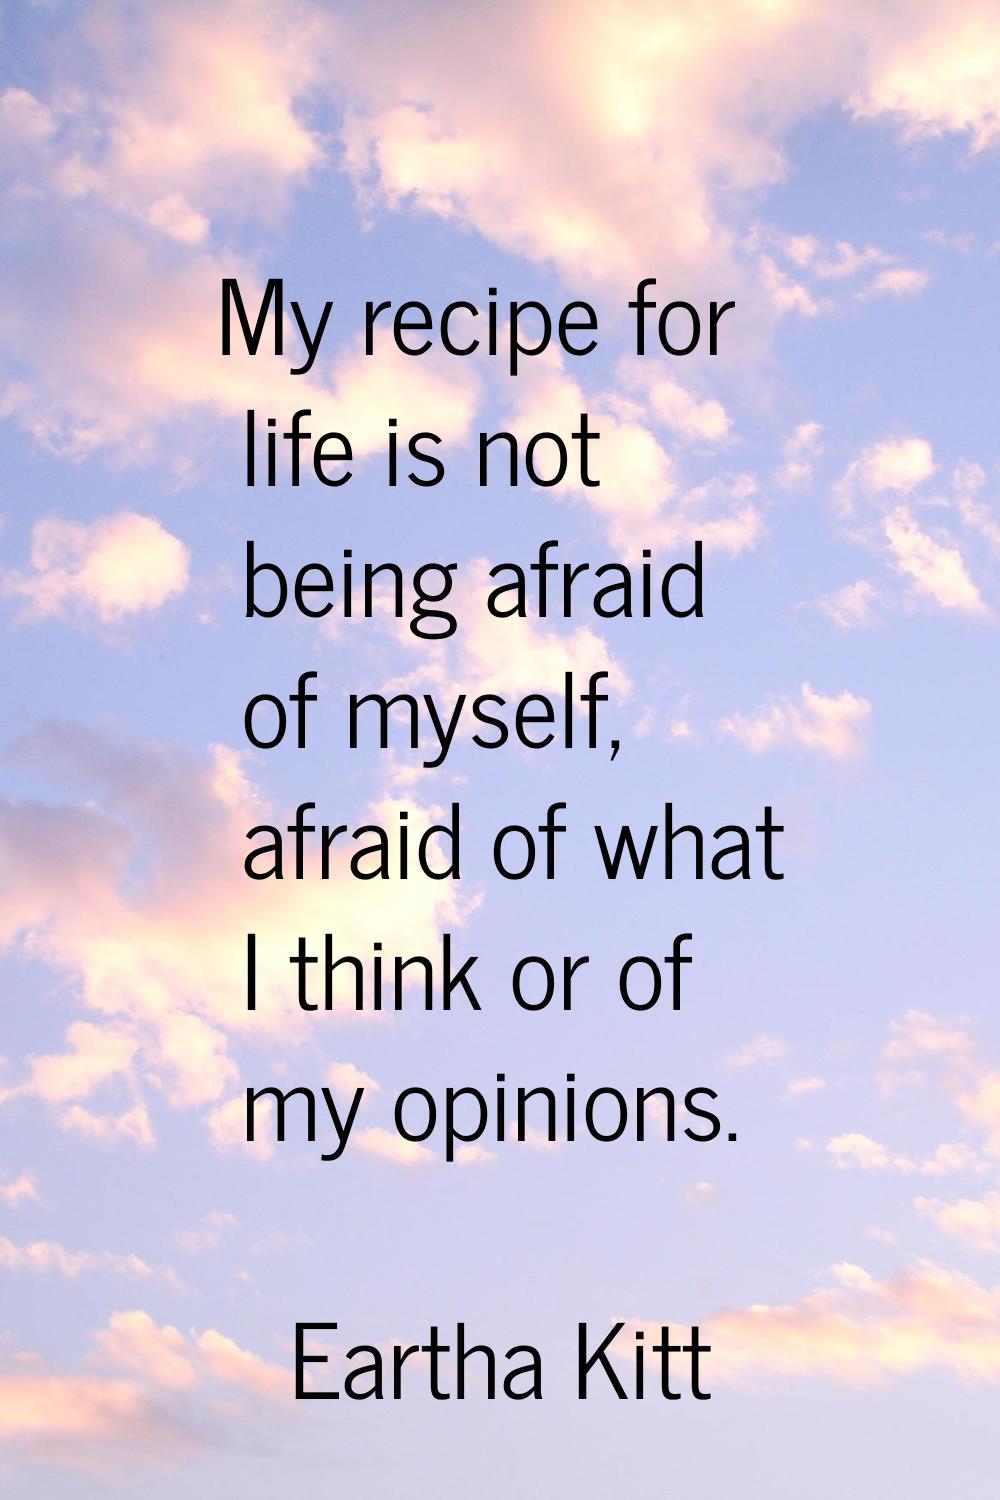 My recipe for life is not being afraid of myself, afraid of what I think or of my opinions.